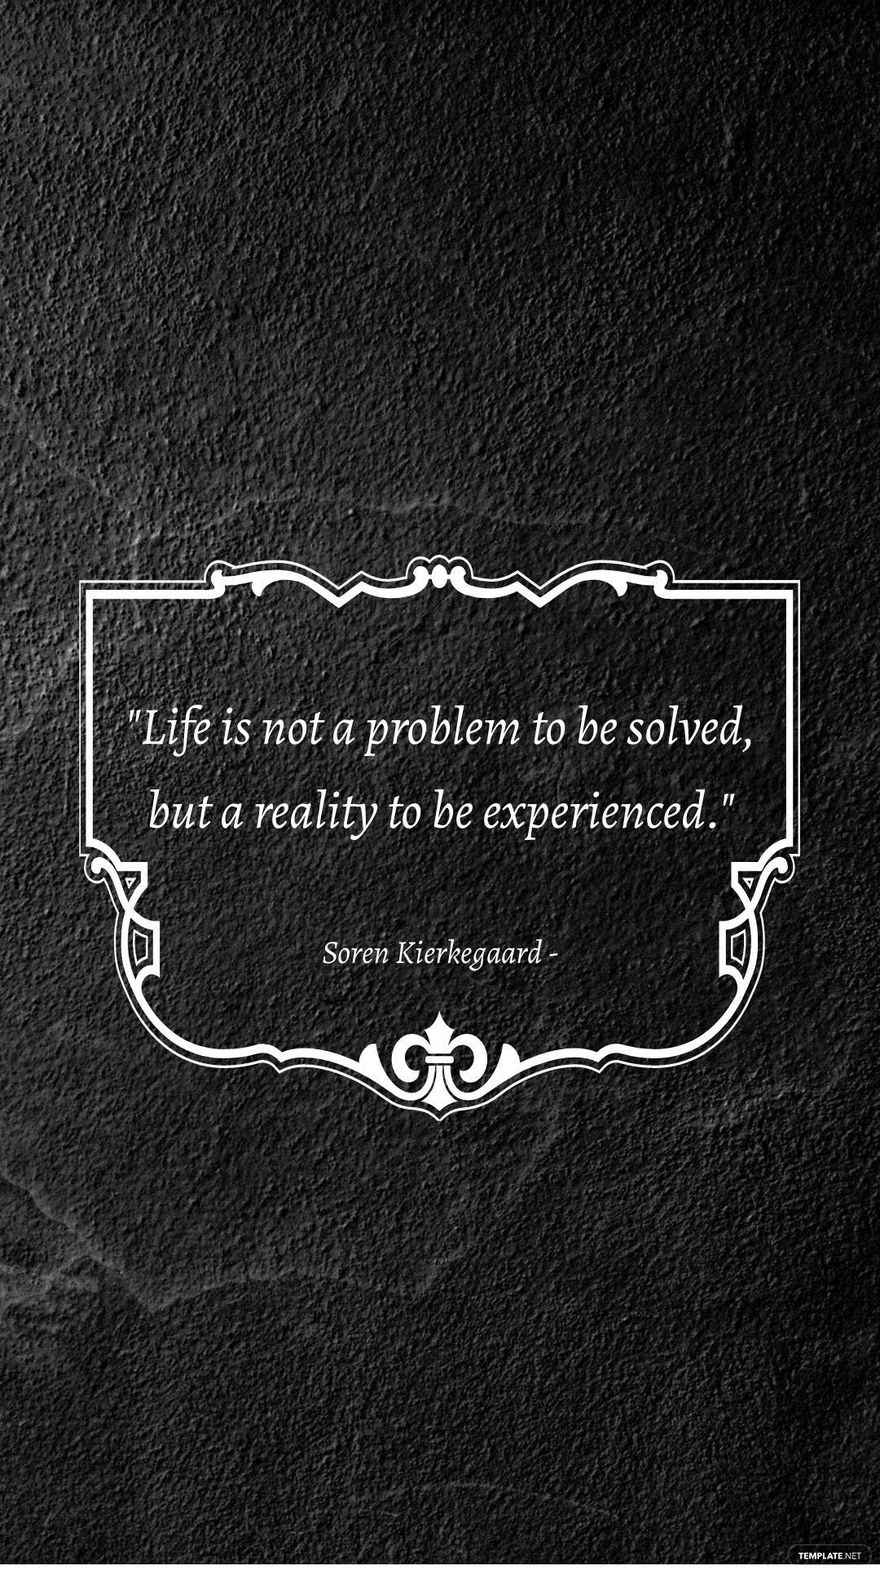 Soren Kierkegaard - Life is not a problem to be solved, but a reality to be experienced.